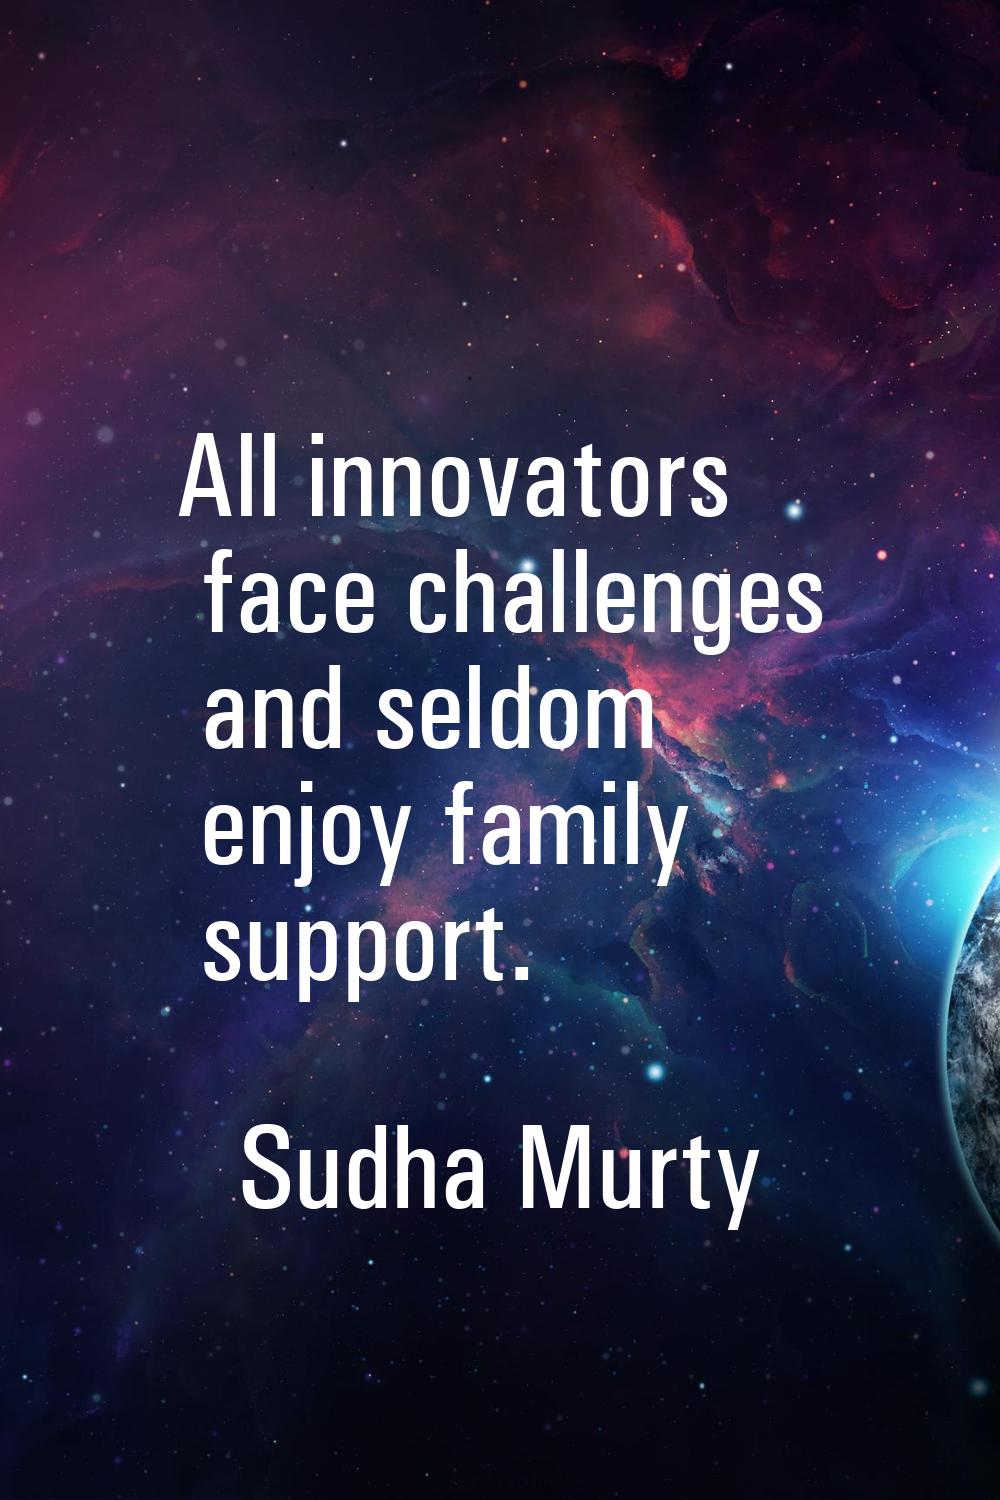 All innovators face challenges and seldom enjoy family support.